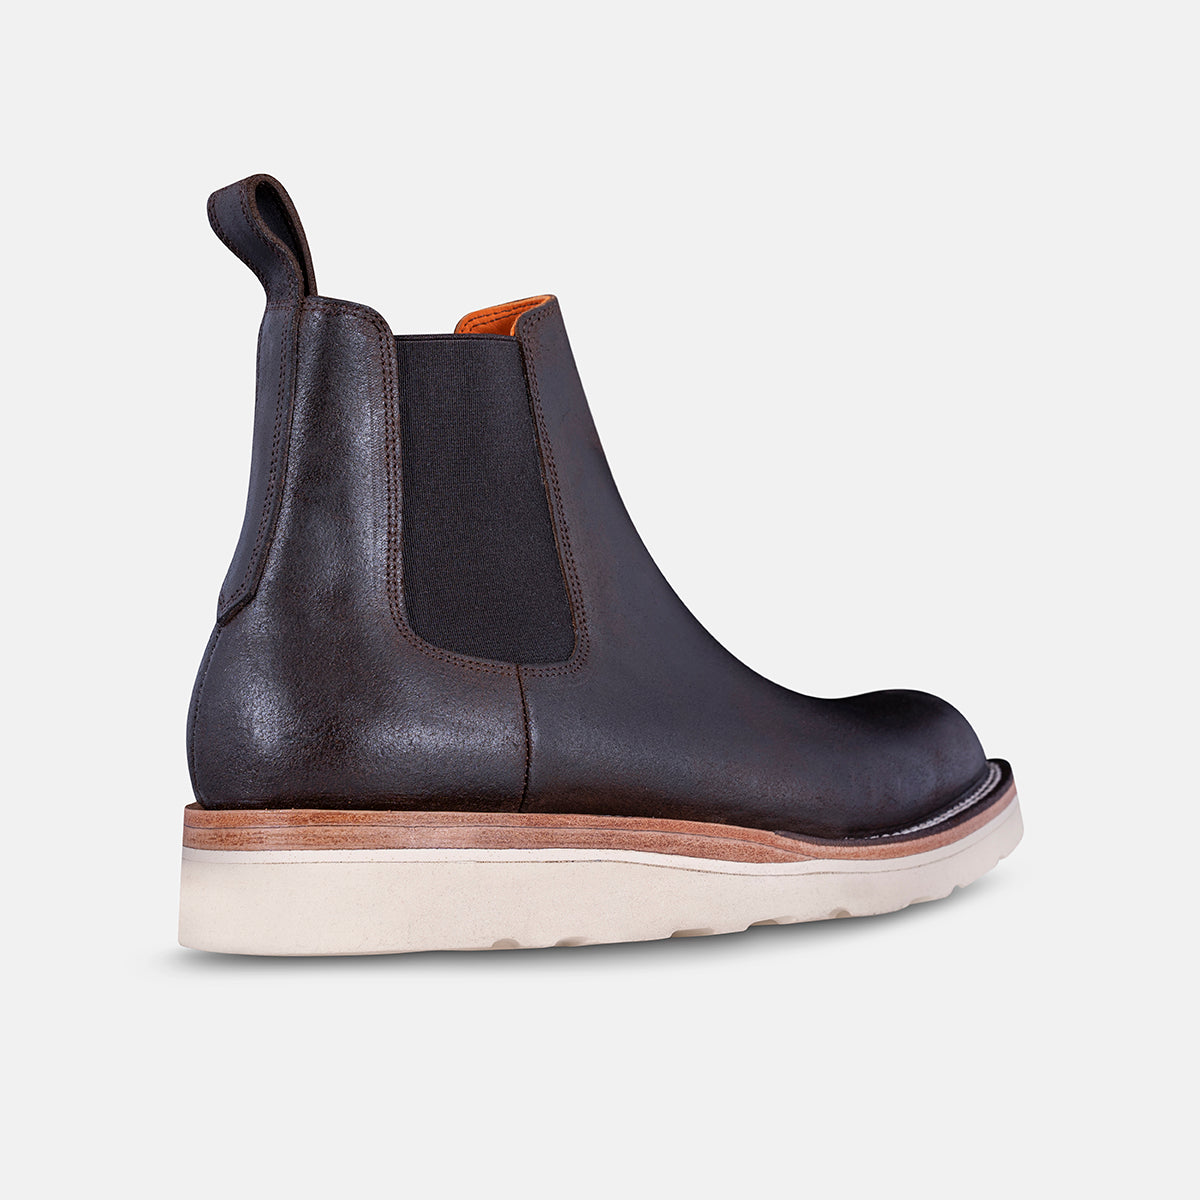 Chelsea boots in wedge sole – Bordon